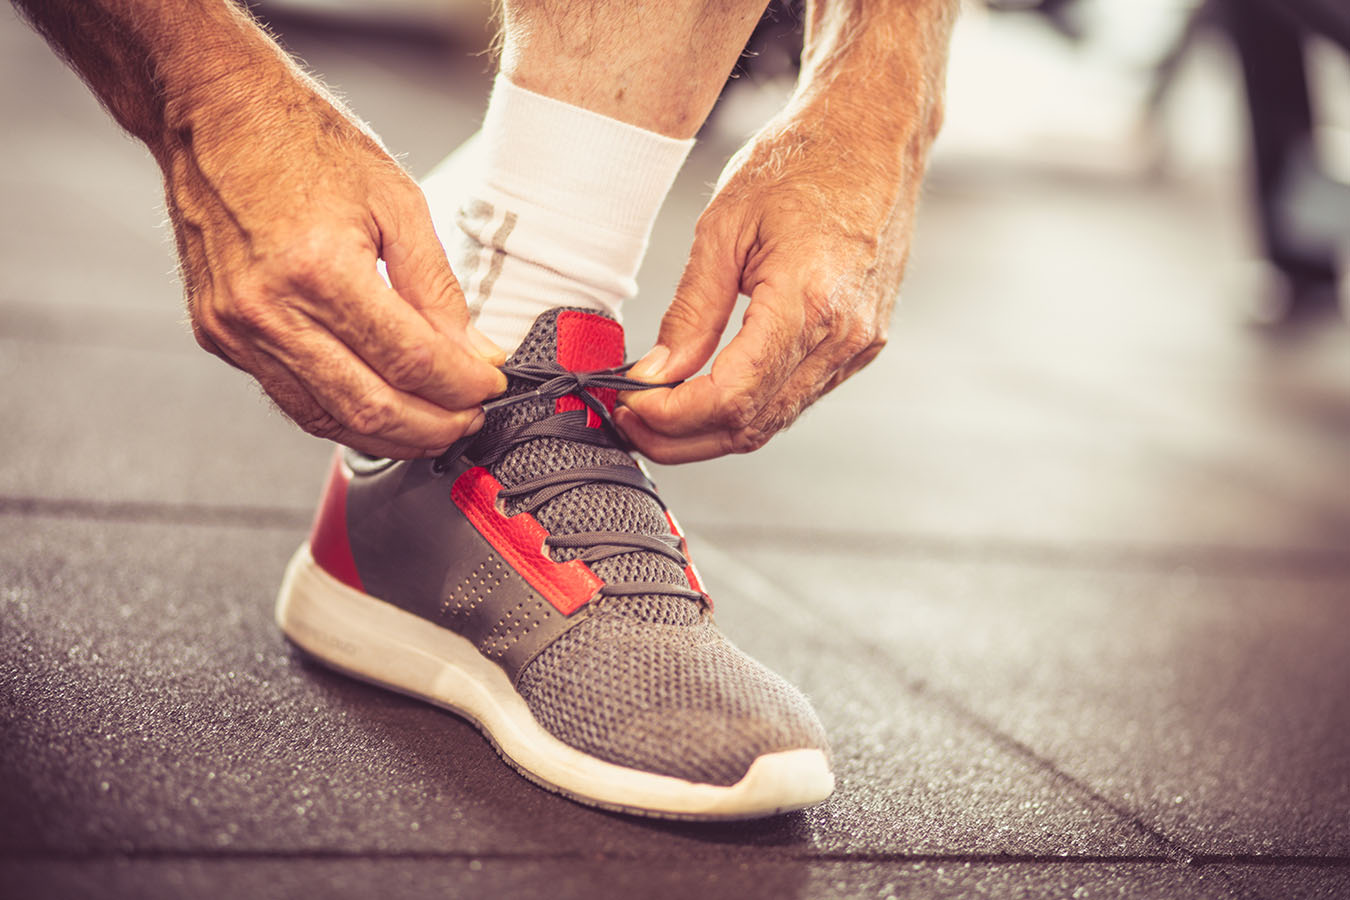 The Best Workout Gear for Active Seniors - SilverSneakers